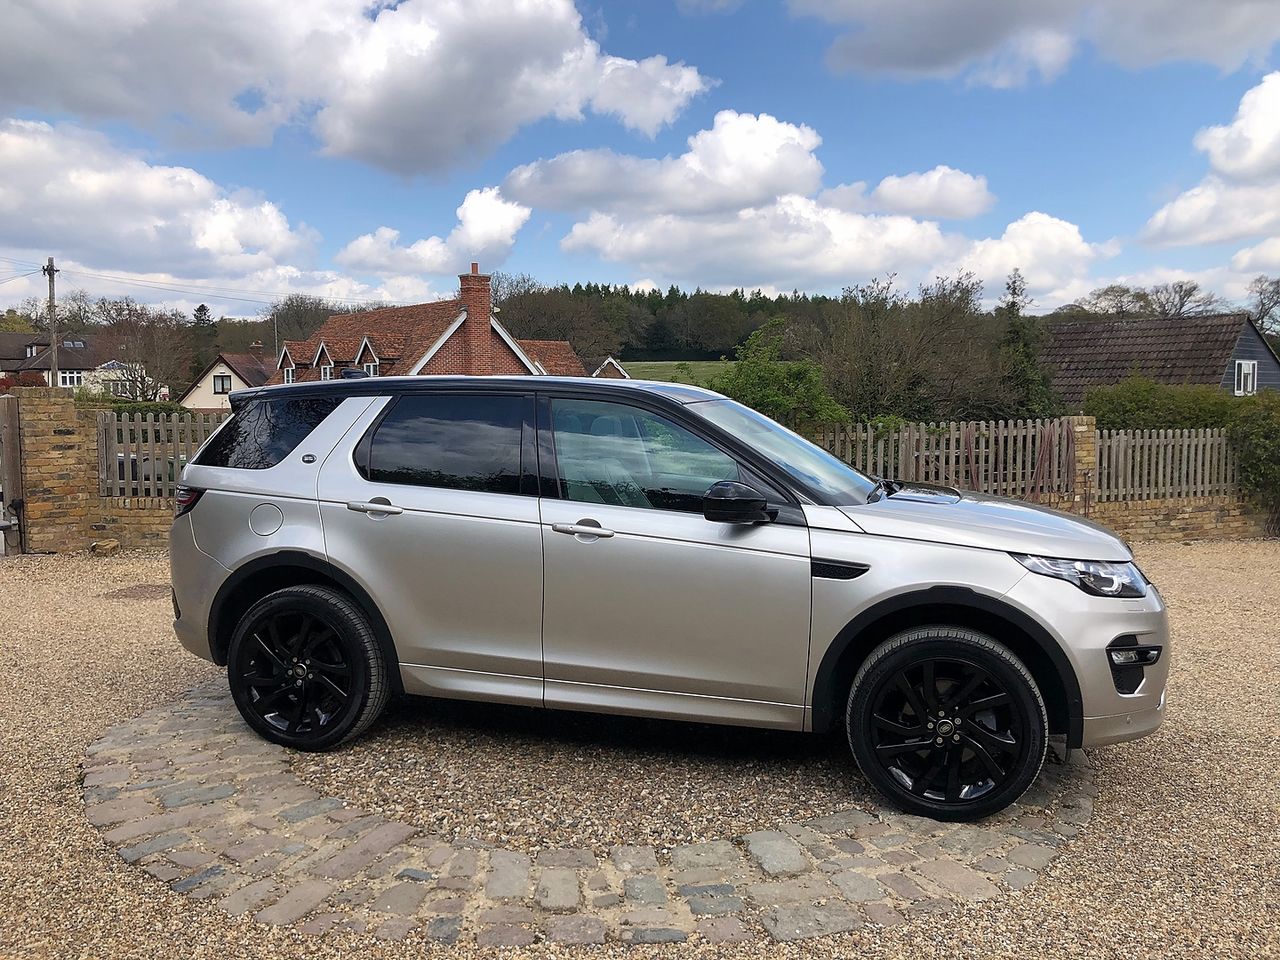 2017 LAND ROVER Discovery Sport HSE Dynamic Lux TD4 180PS Auto 4WD - Picture 3 of 17